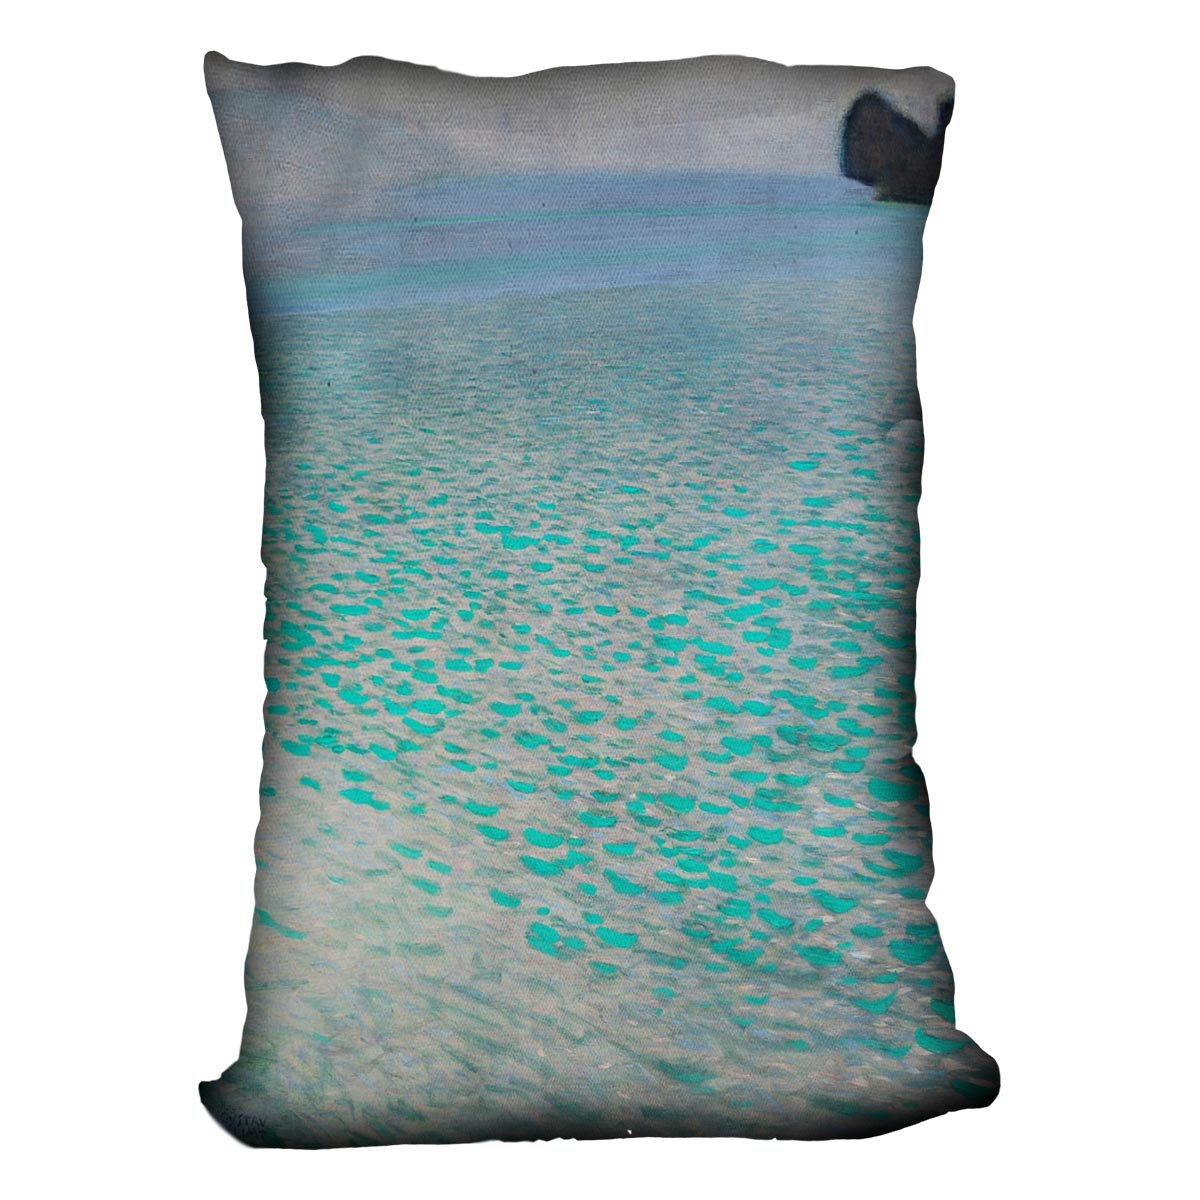 Attersee by Klimt Throw Pillow